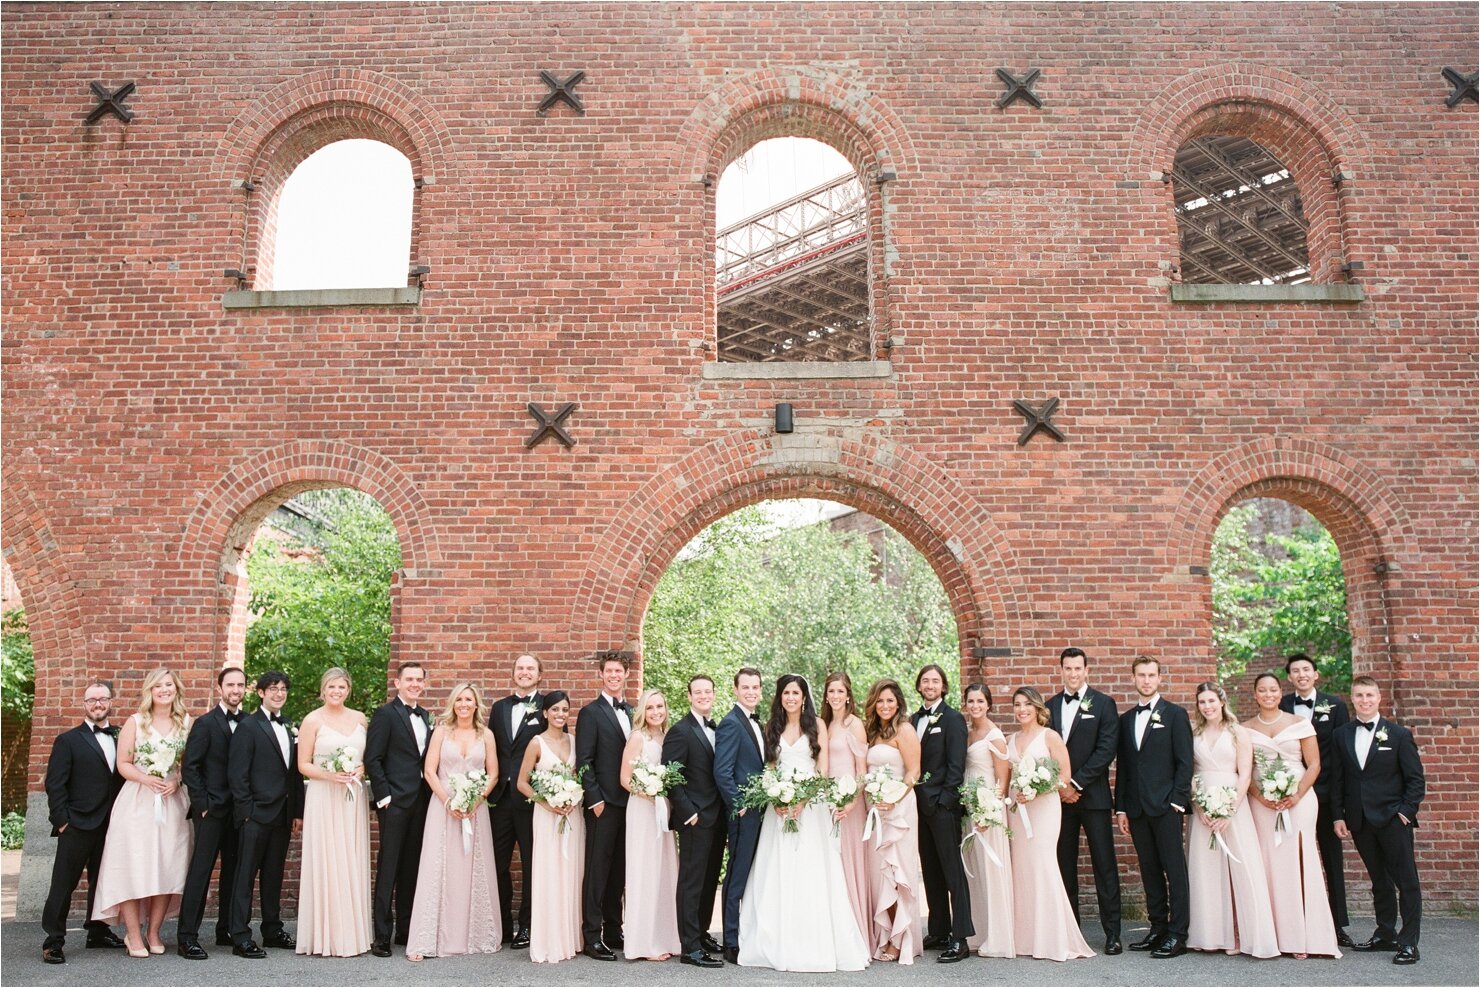 Bridal Party Photos at St. Anne's Warehouse in Brooklyn